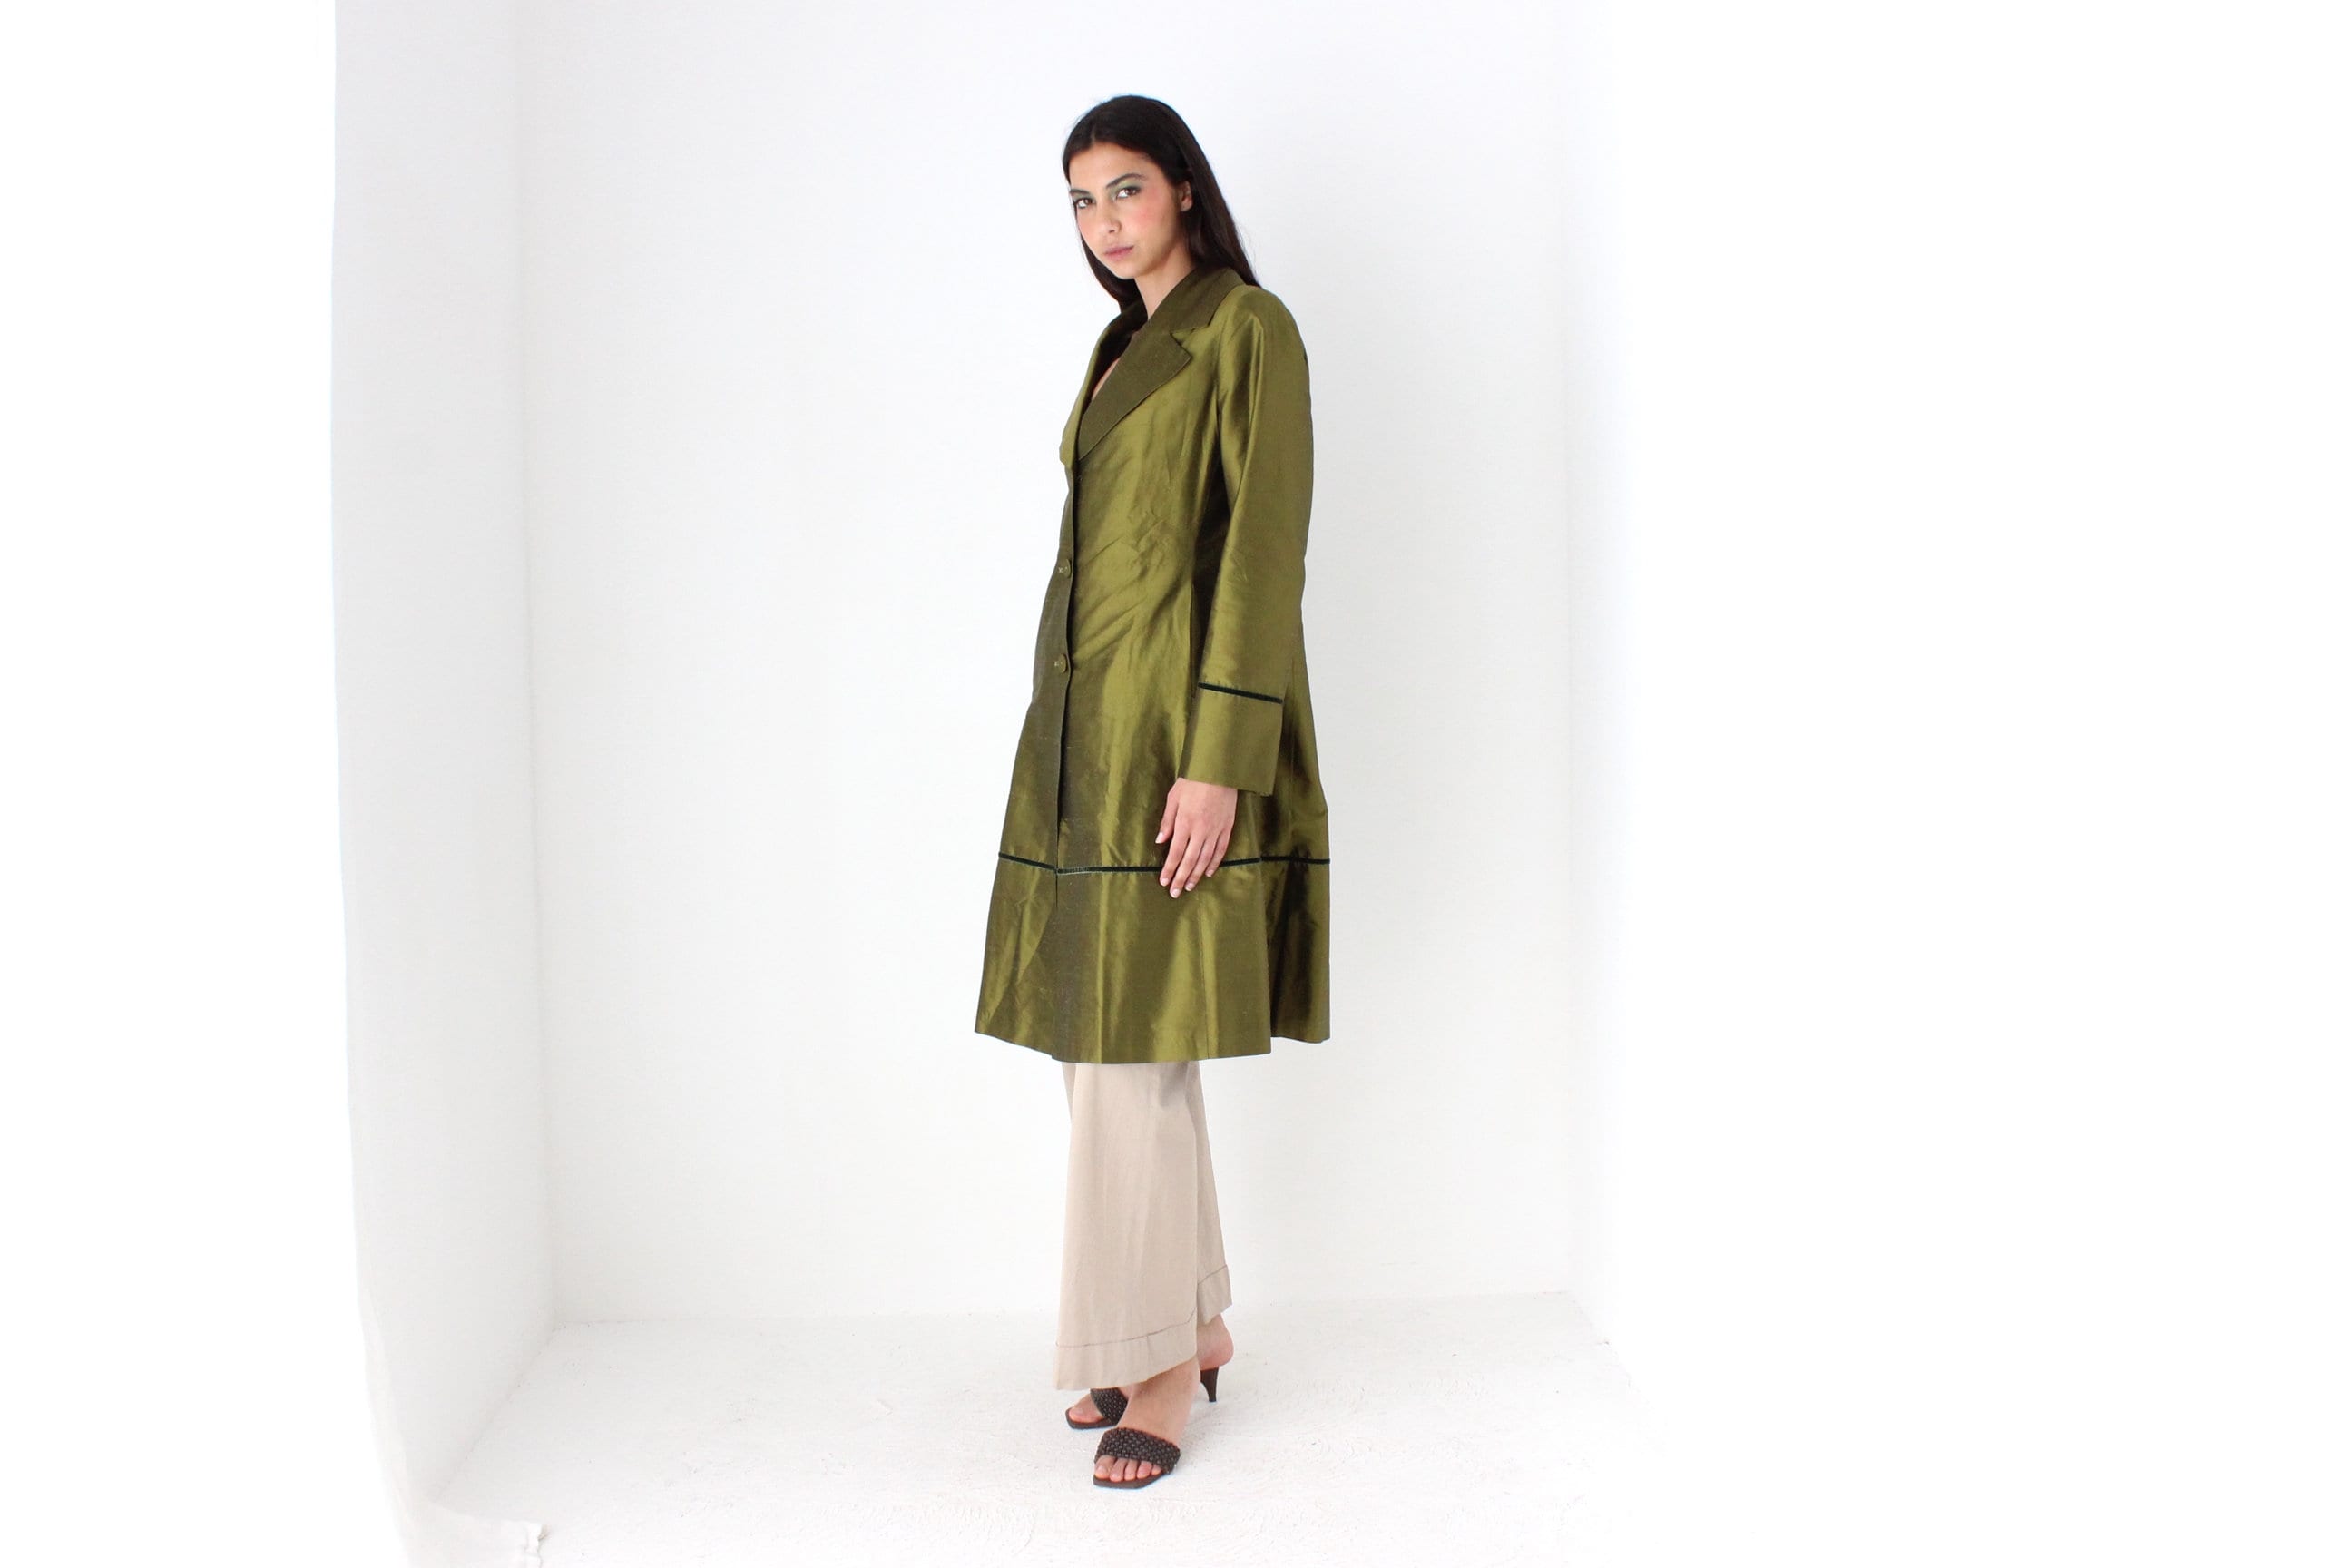 90s Metallic Raw Silk Olive Green Coat by Tintoretto